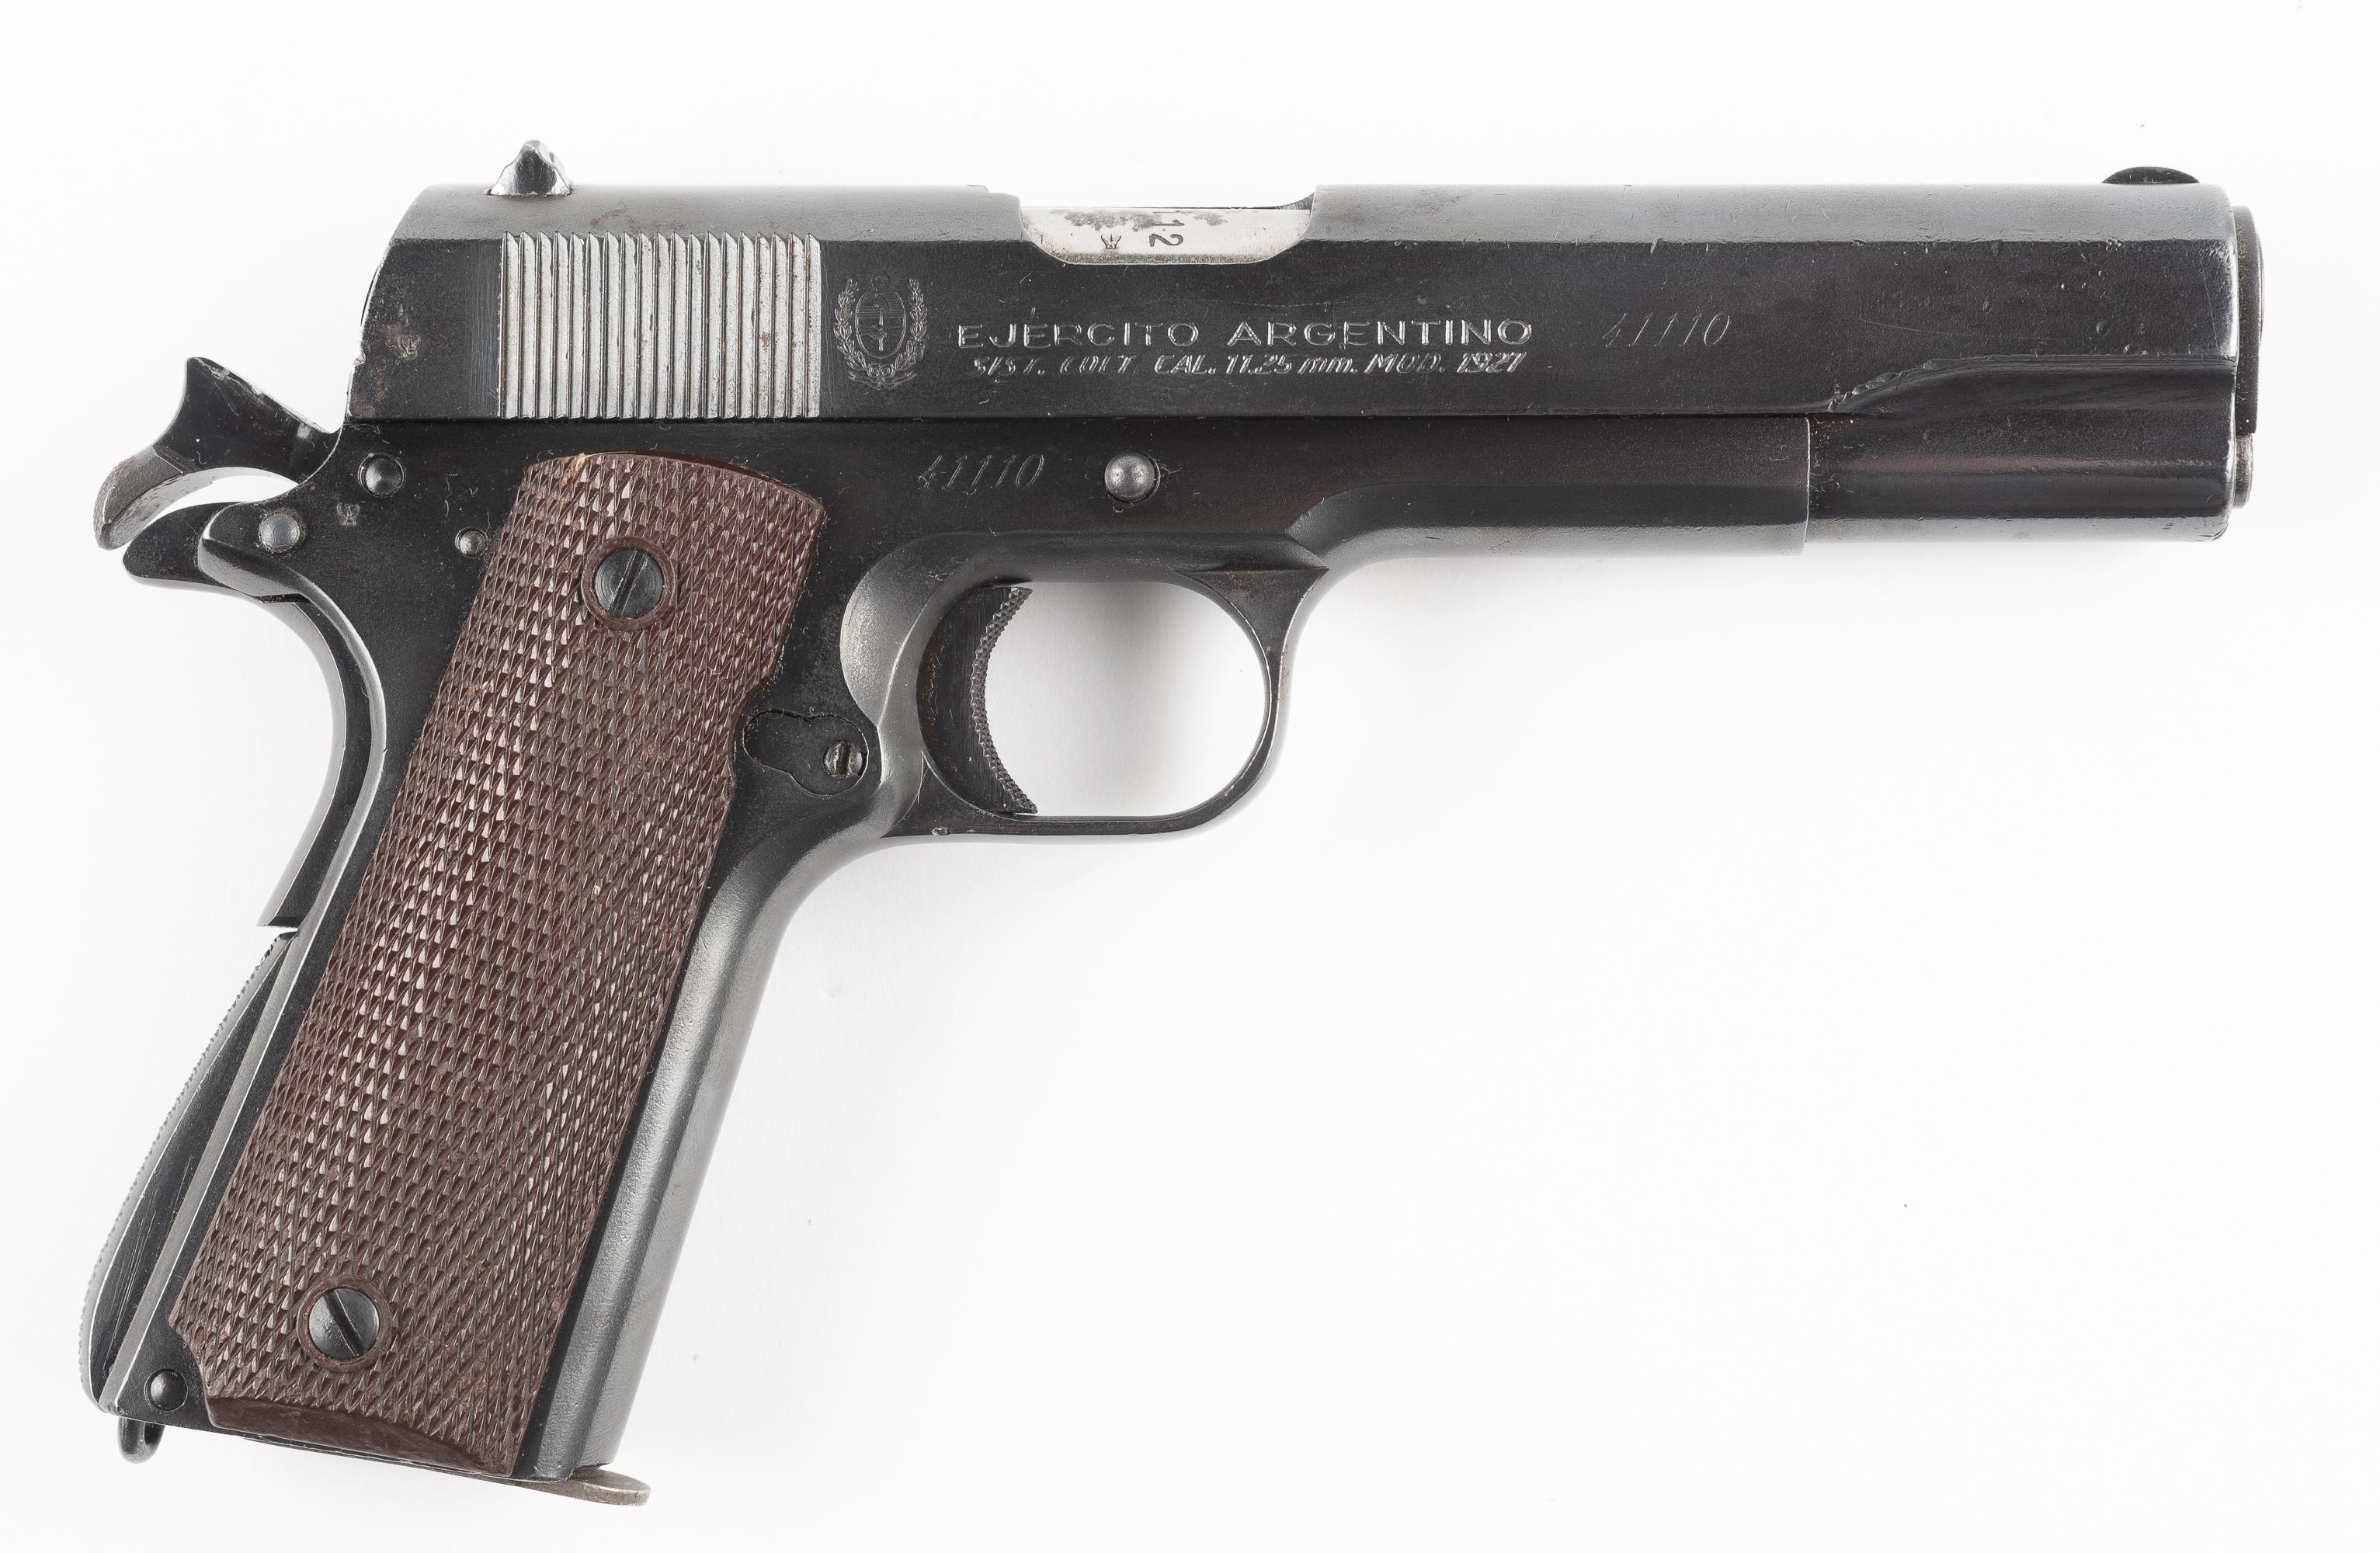 Ejercito Argentino Systems Colt 1927 Pistol, .45